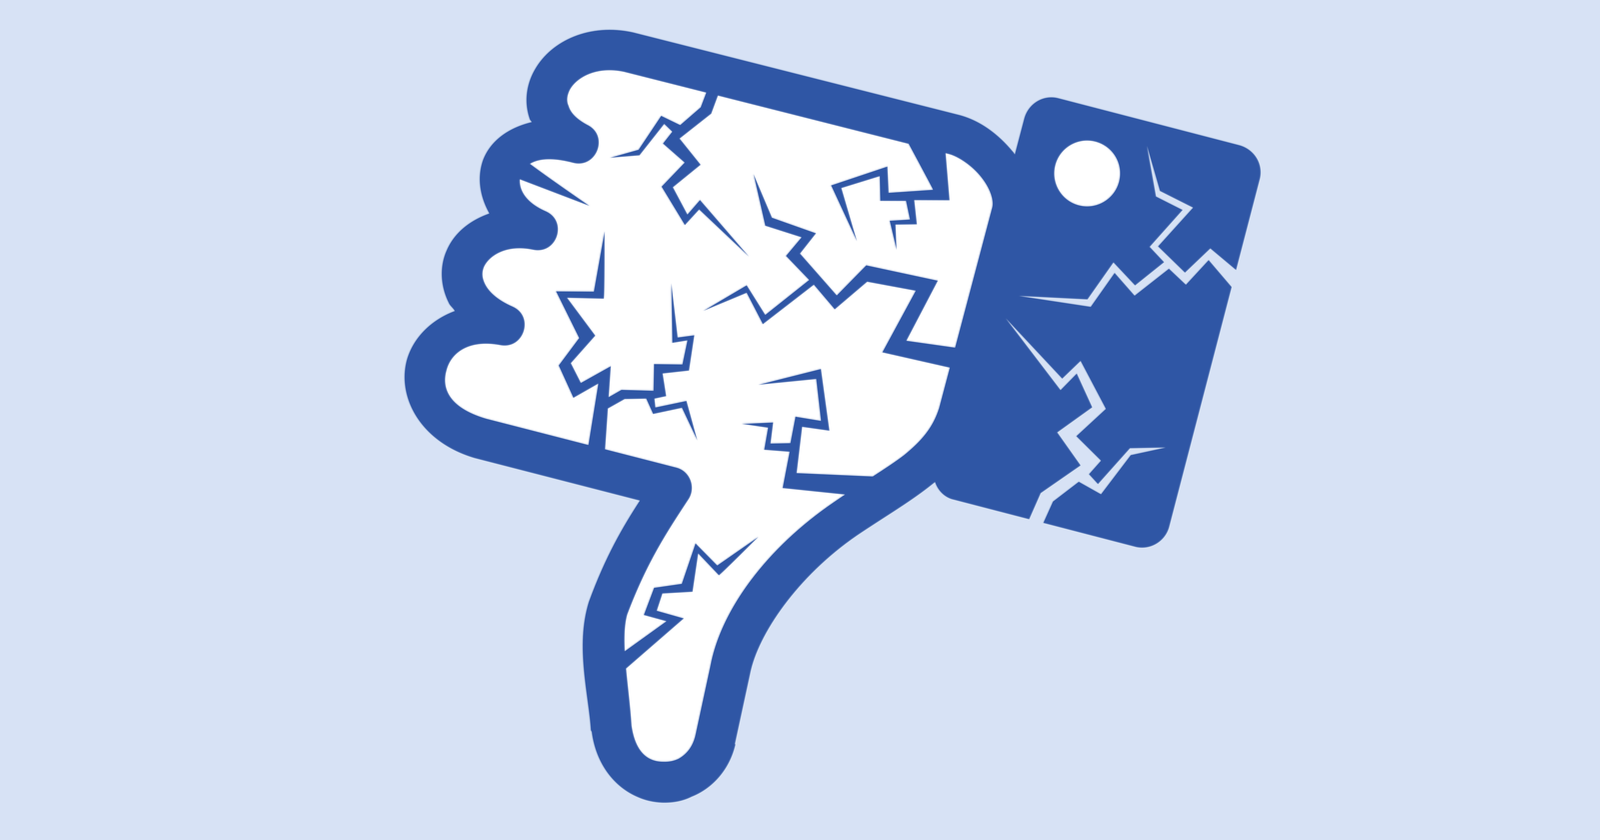 Facebook outage